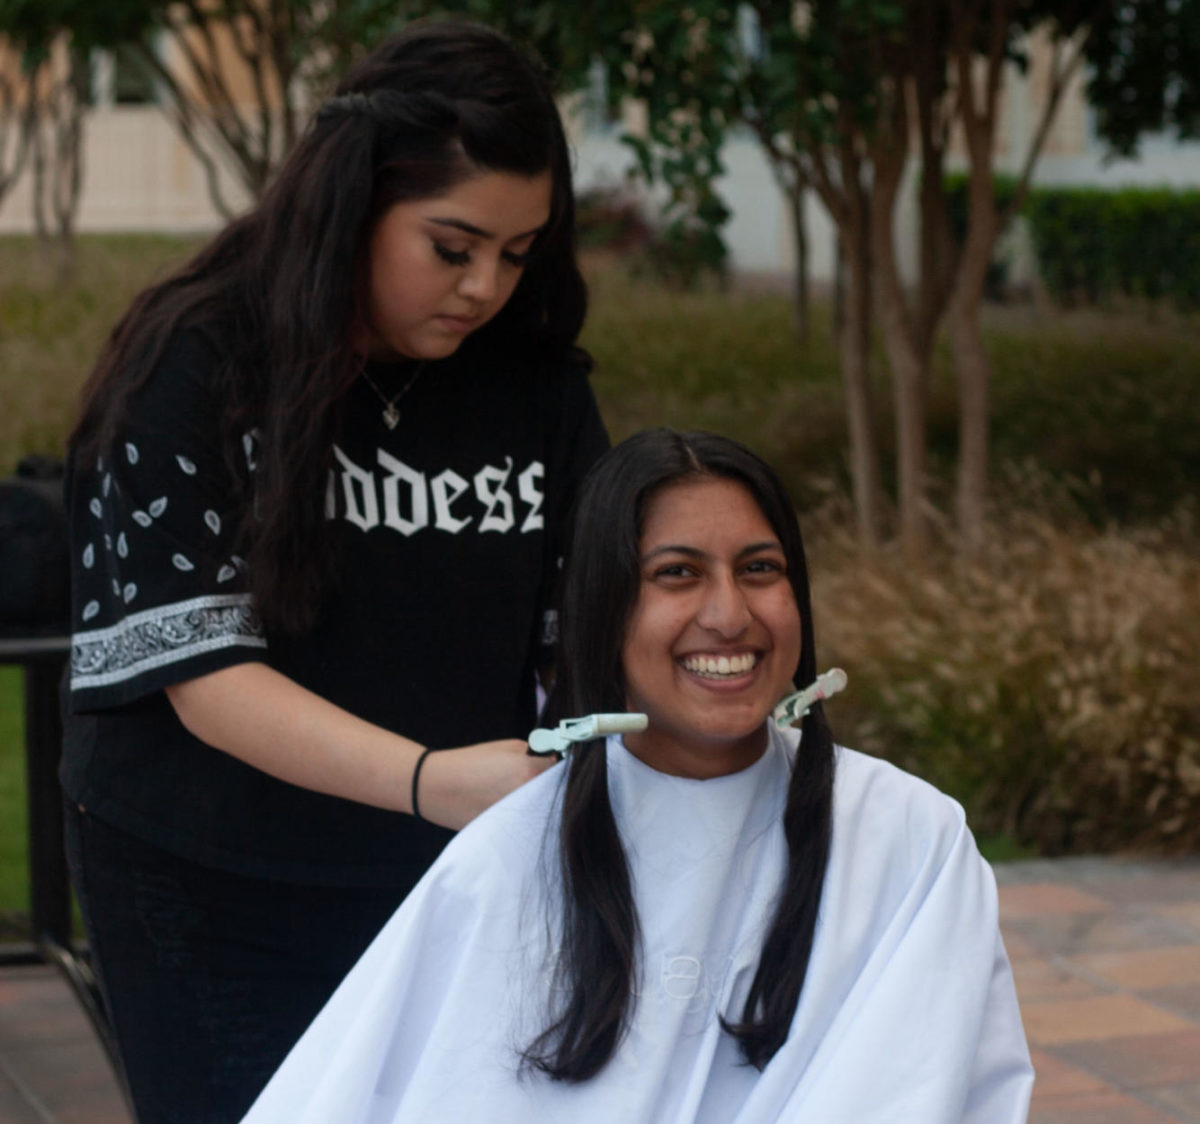 TCU+Student+donates+eight+inches+of+hair+at+past+hair+donation+drive.+%28Courtesy+of%3A+Andre+Giammattei%29